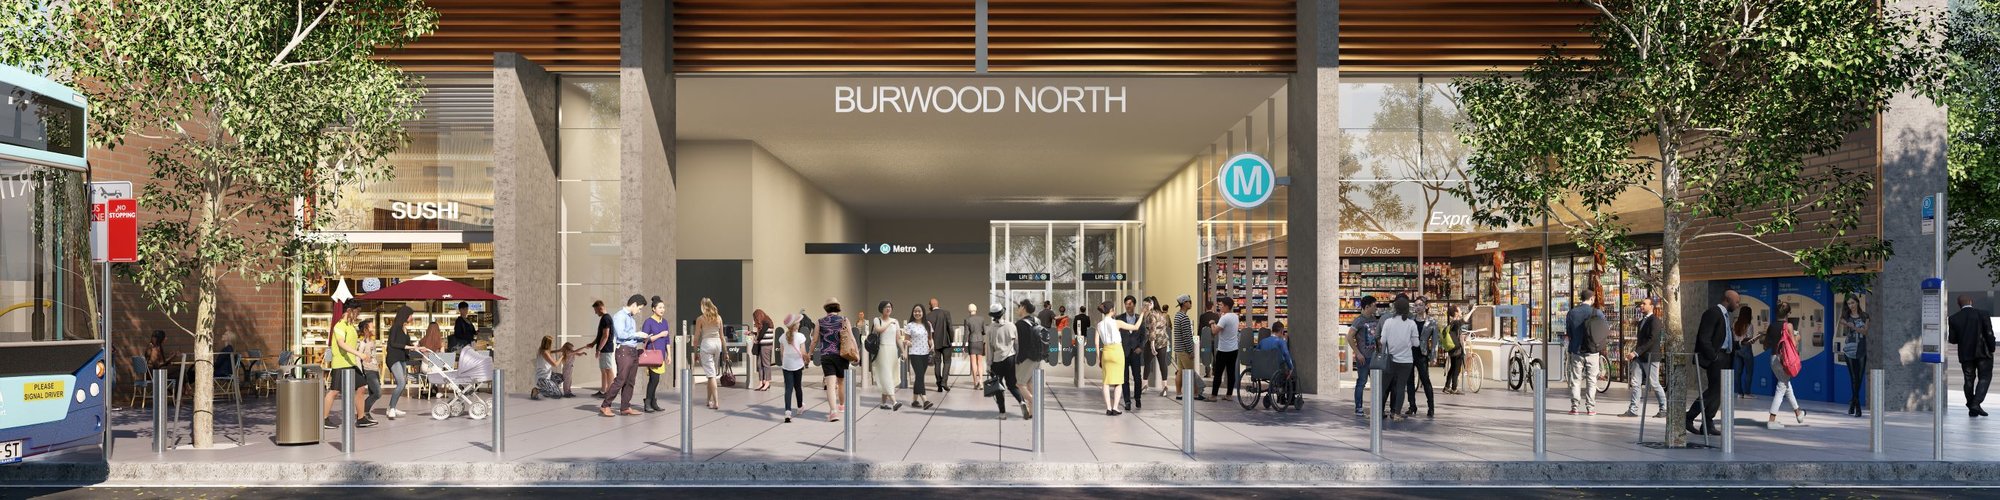 Artist's impression of commuters travelling in and out of Burwood North Station